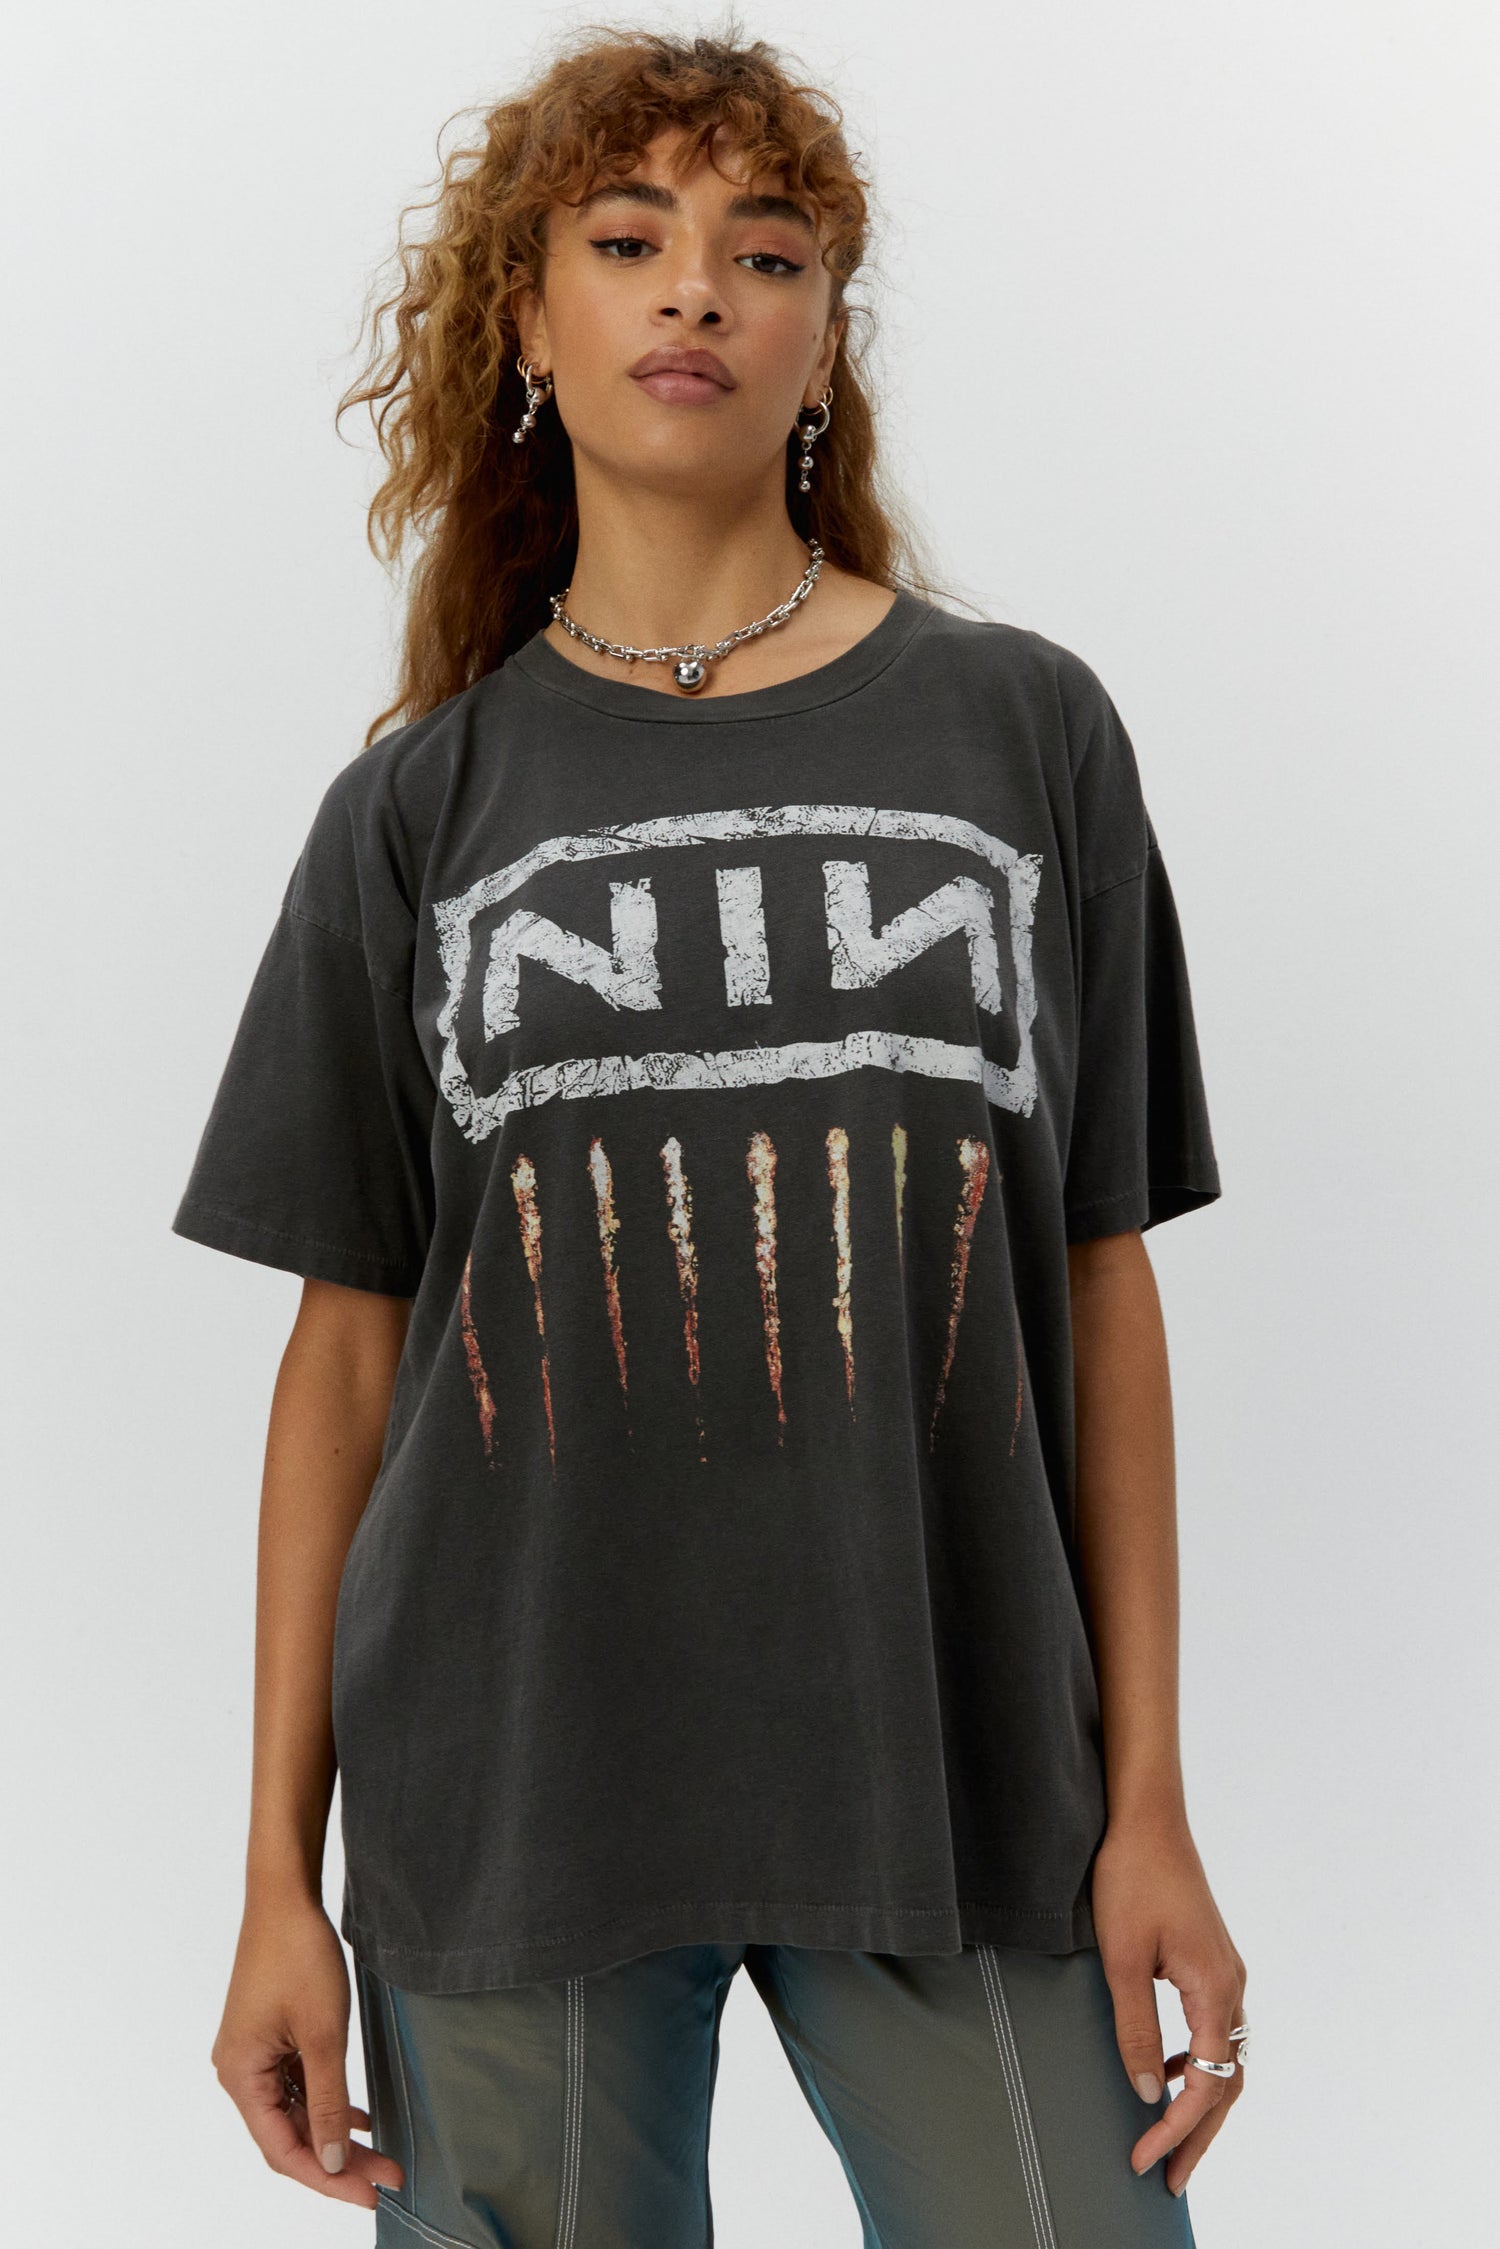 black tee designed with the band's logo NIN